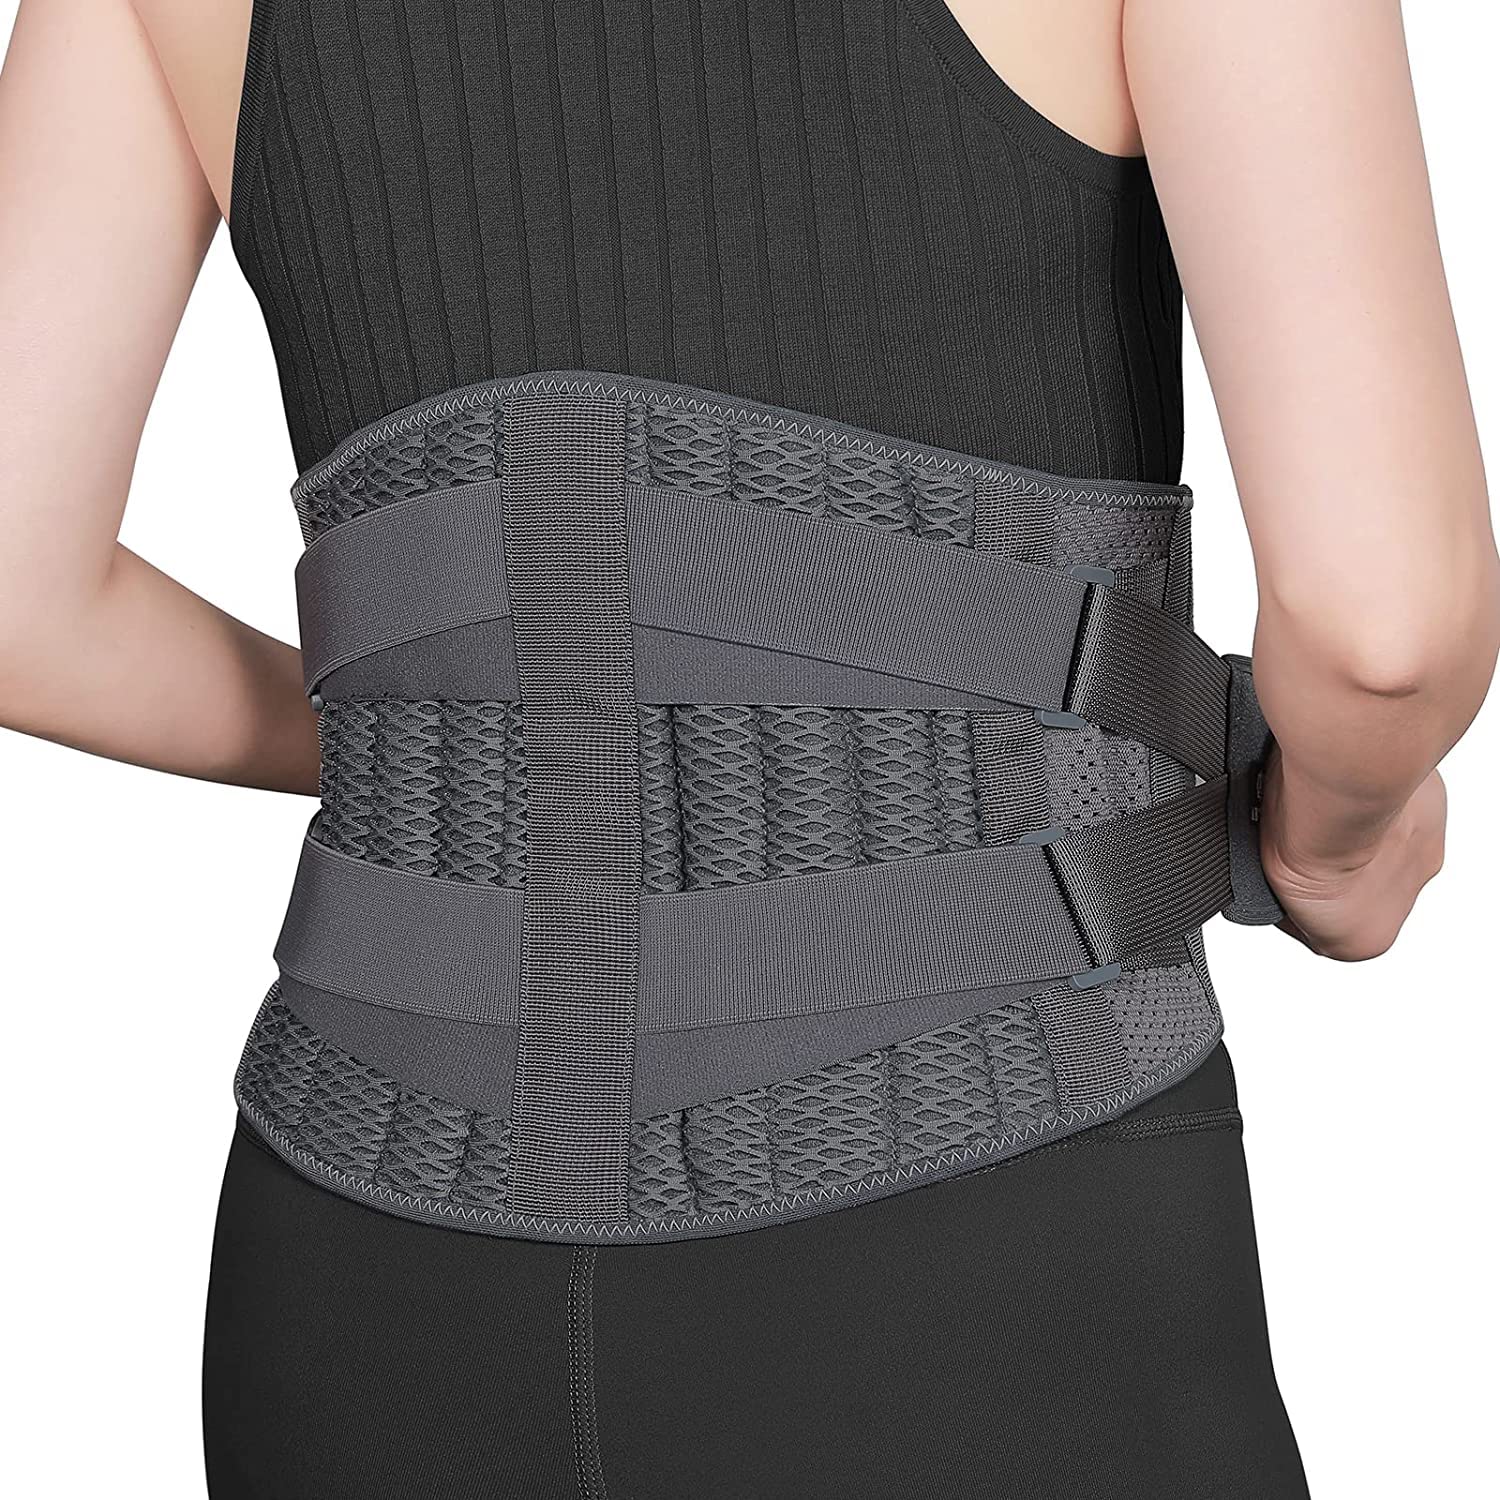 Back Brace Support Belt-Lumbar Support Back Brace for Lifting,Back Pain,  Sciatica, Scoliosis, Herniated Disc Adjustable Support Straps-Lower Back